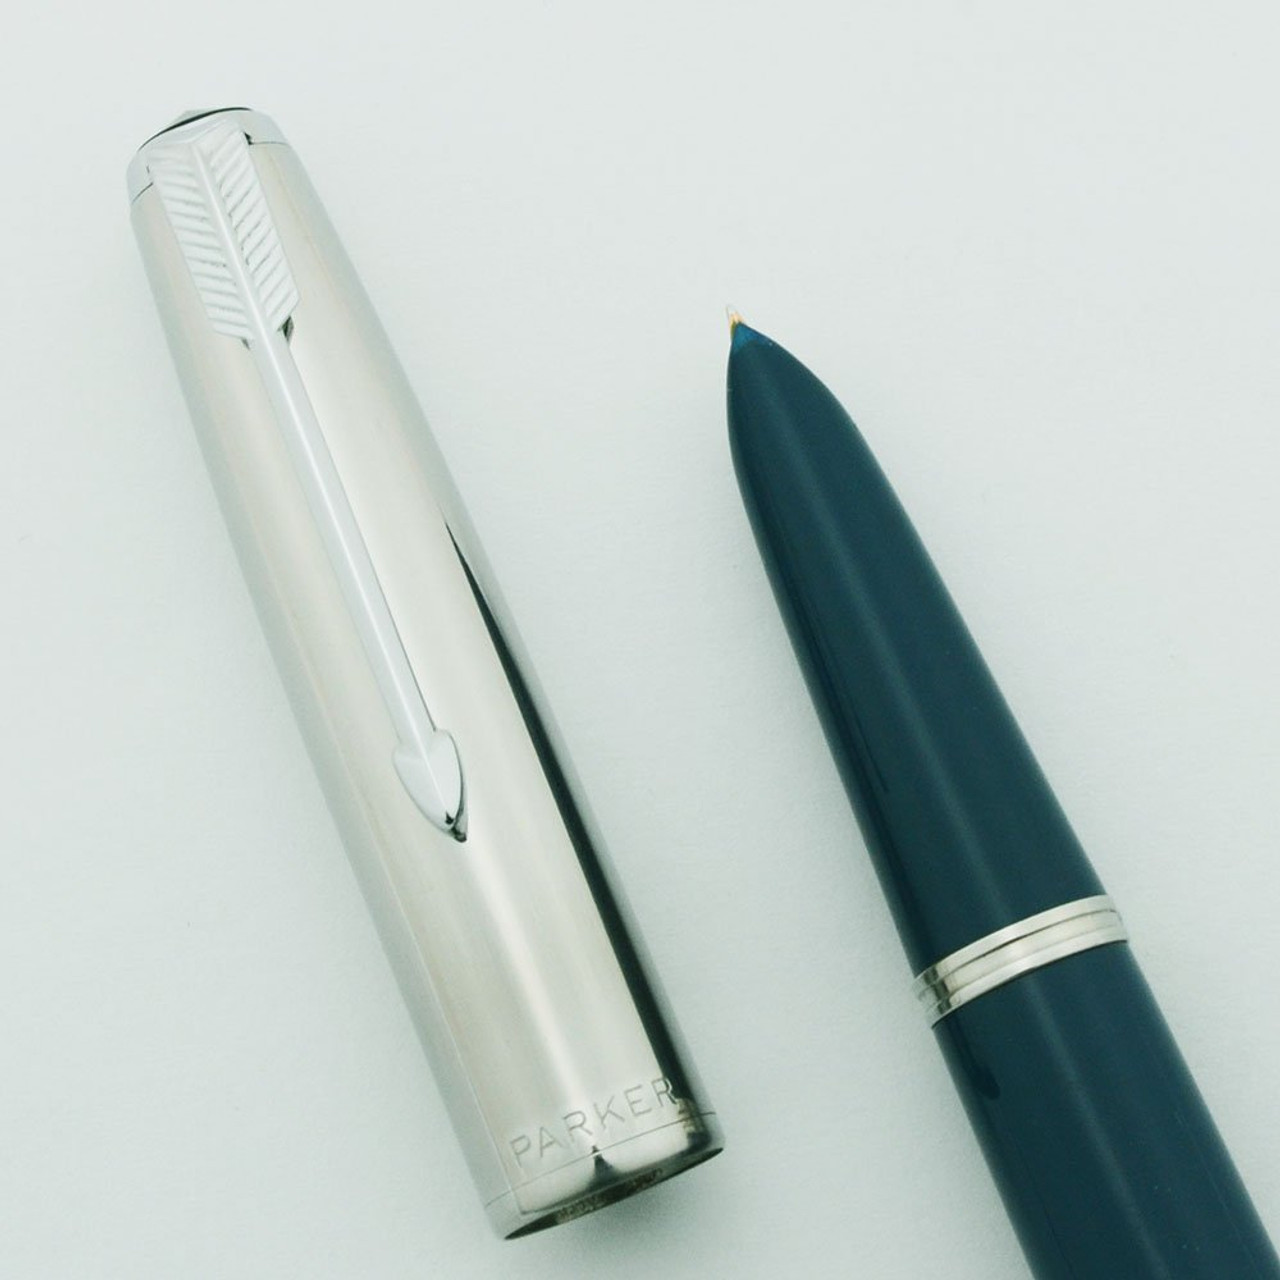 Parker 51 Special Aerometric (1948) - Teal Blue, Demi, Shiny Steel Cap,  Fine Gold Nib (Excellent, Works Well) - Peyton Street Pens